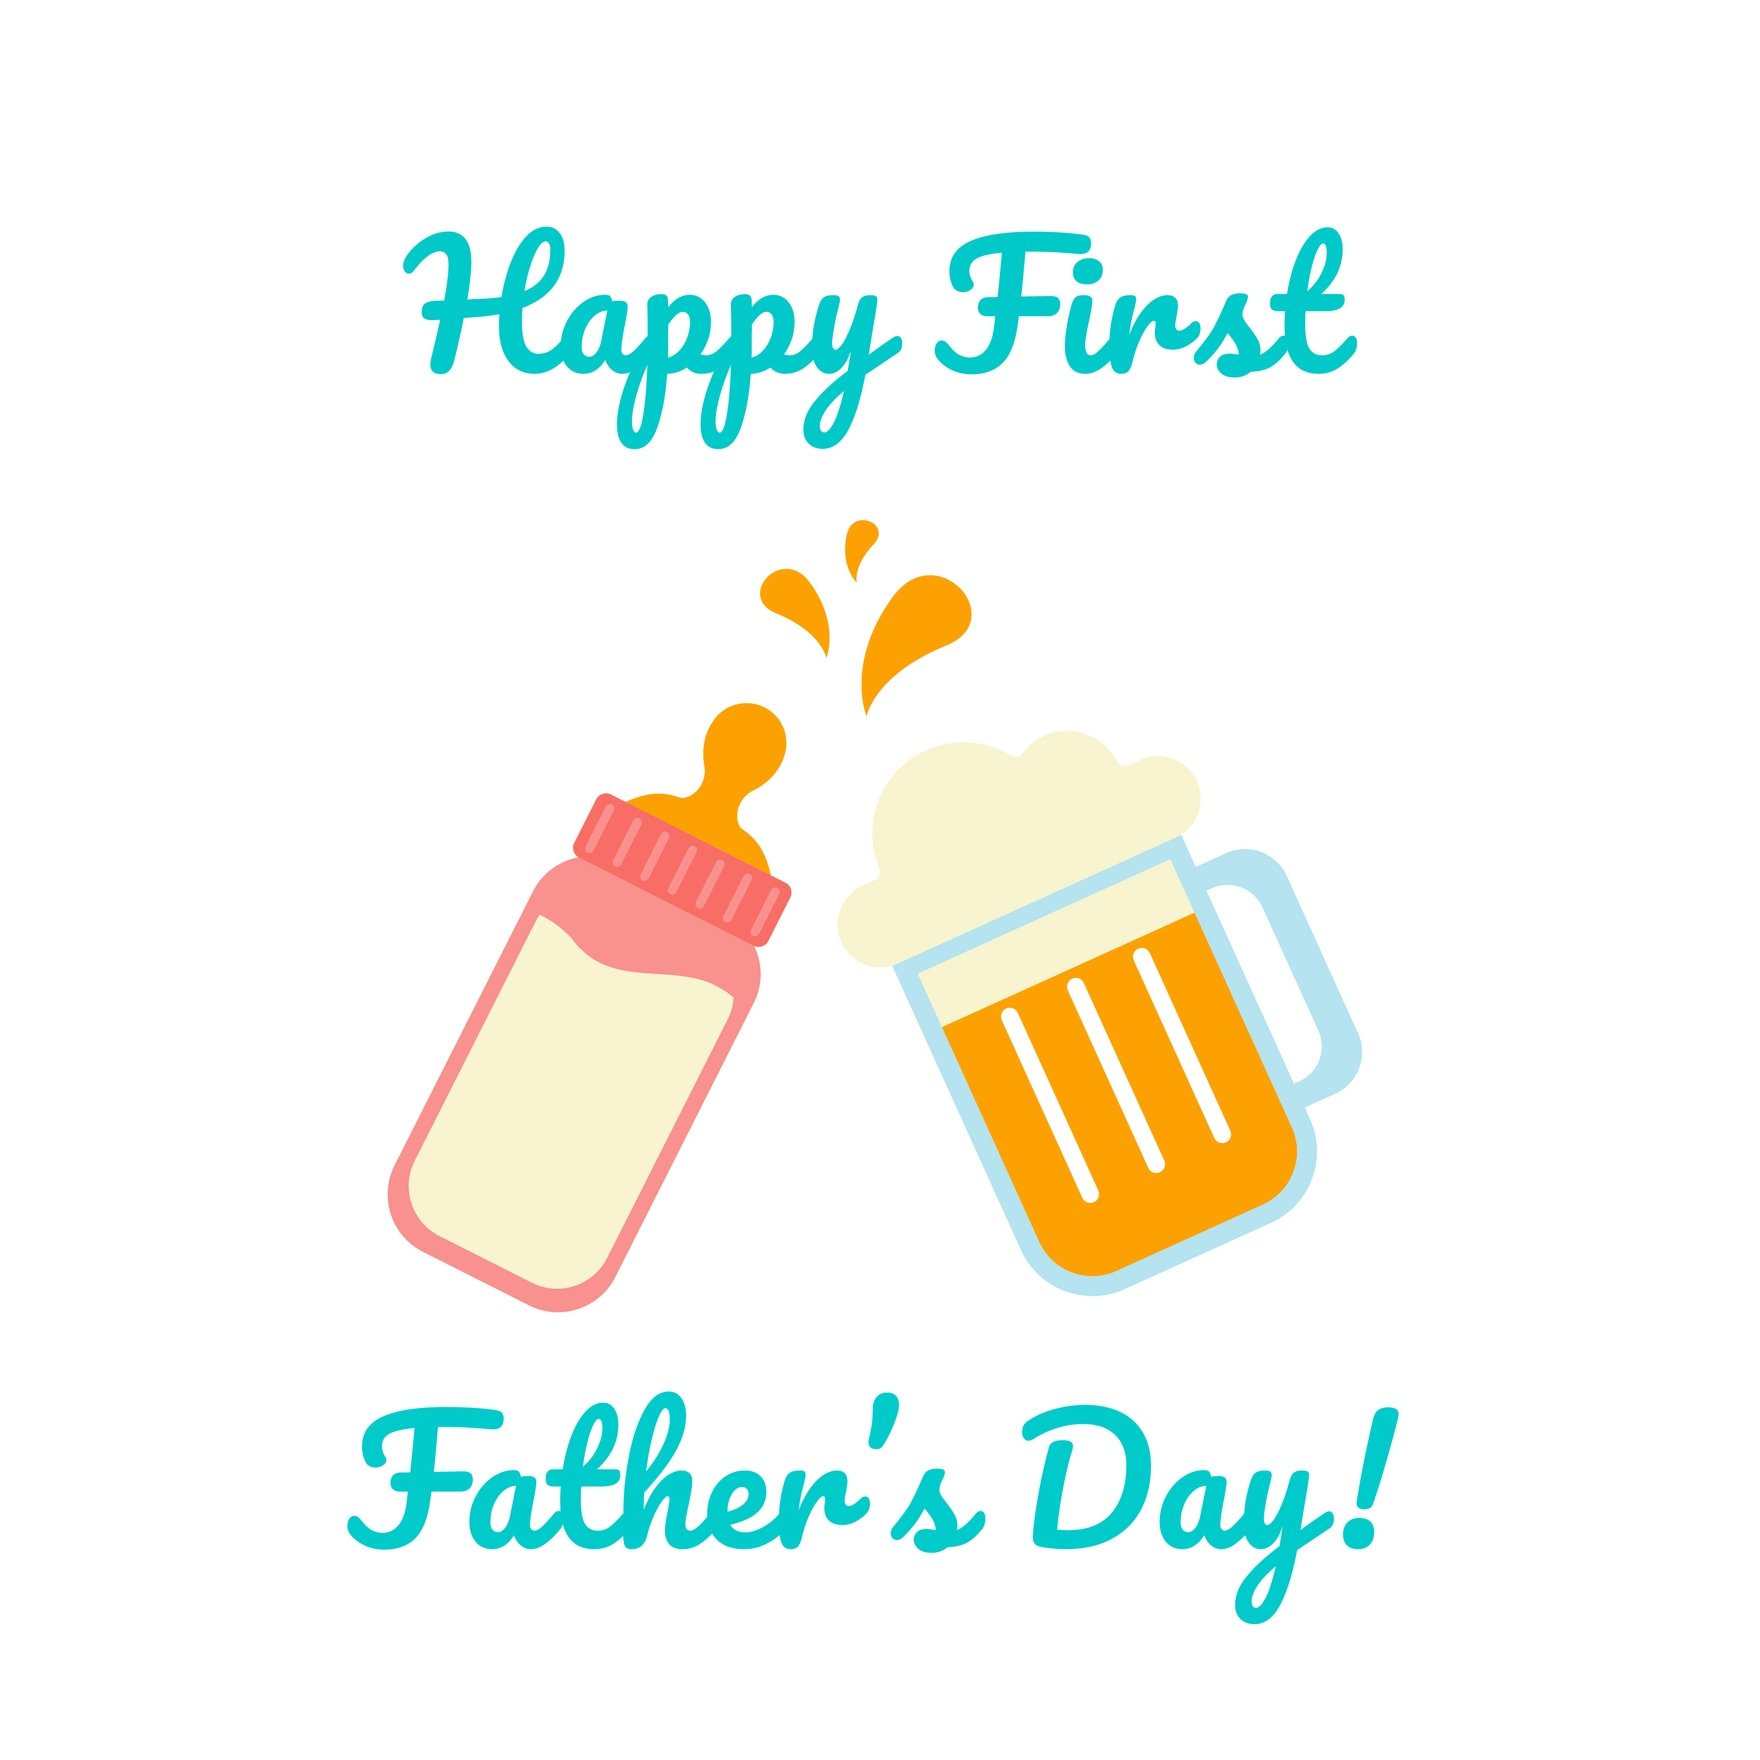 Free Happy First Father's Day Gif in Illustrator, EPS, SVG, JPG, GIF, PNG, After Effects